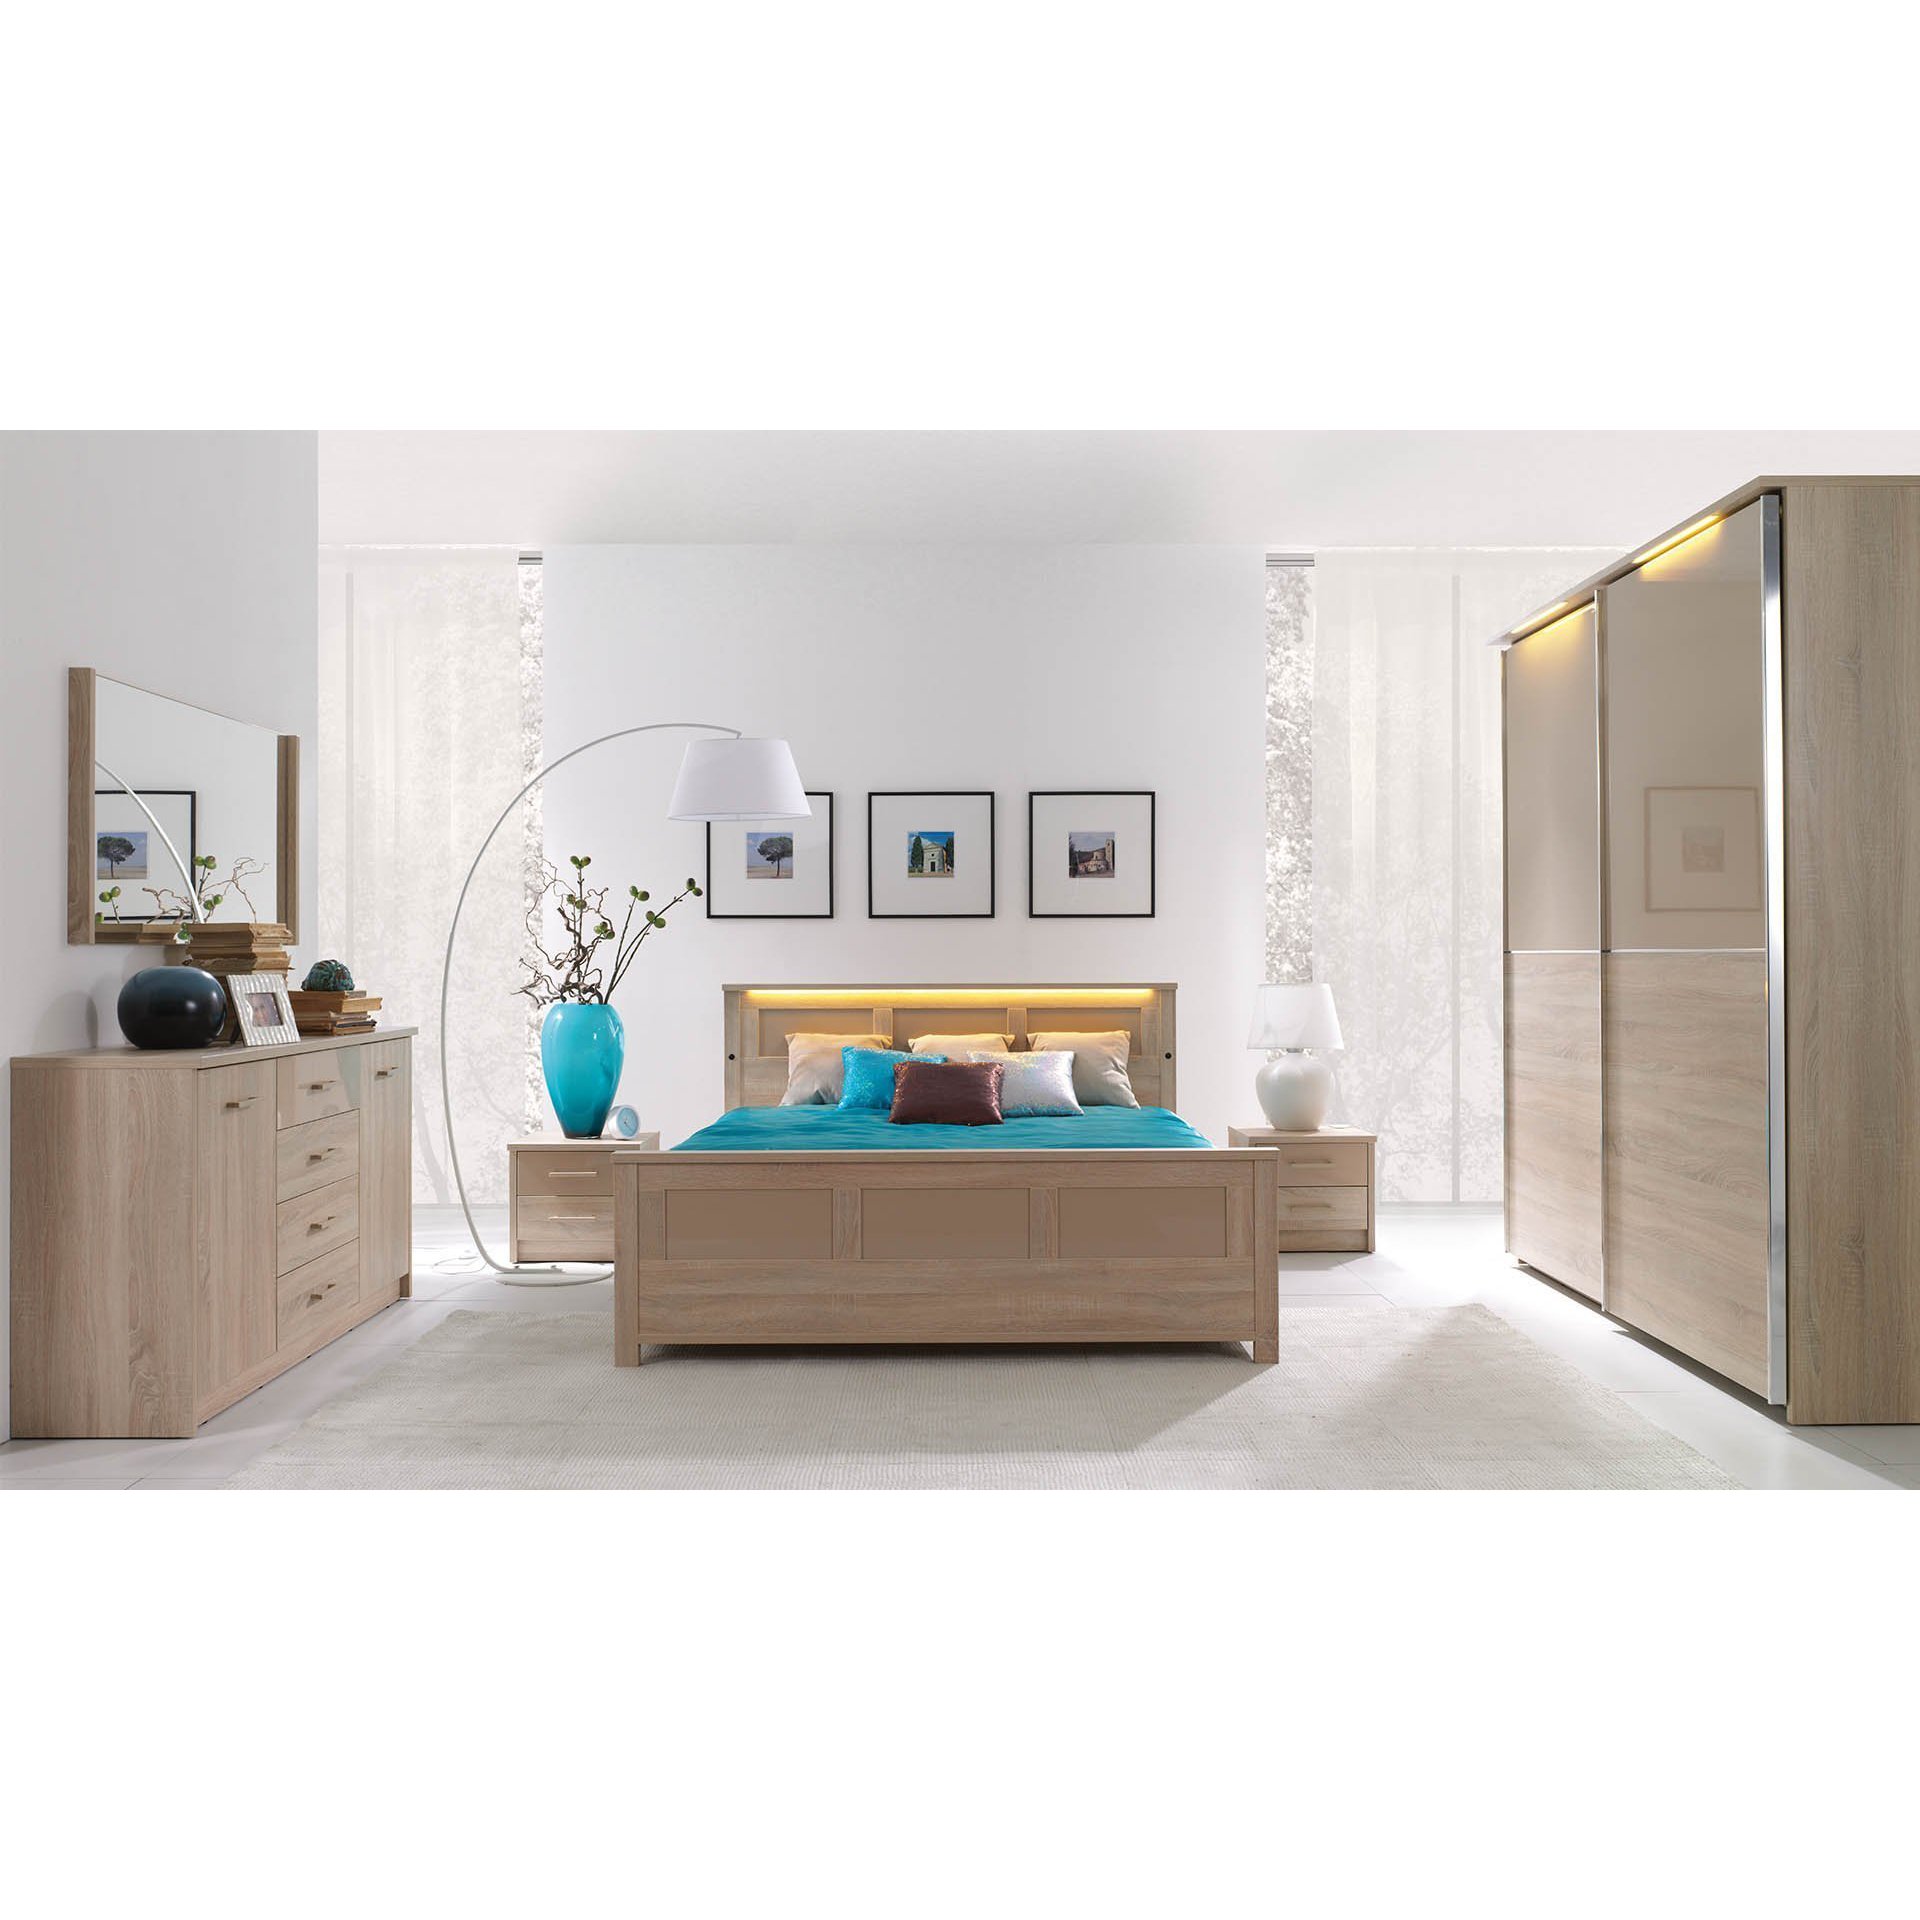 Cremona Bed with Storage and LED Lights - Oak Sonoma 140 x 200cm